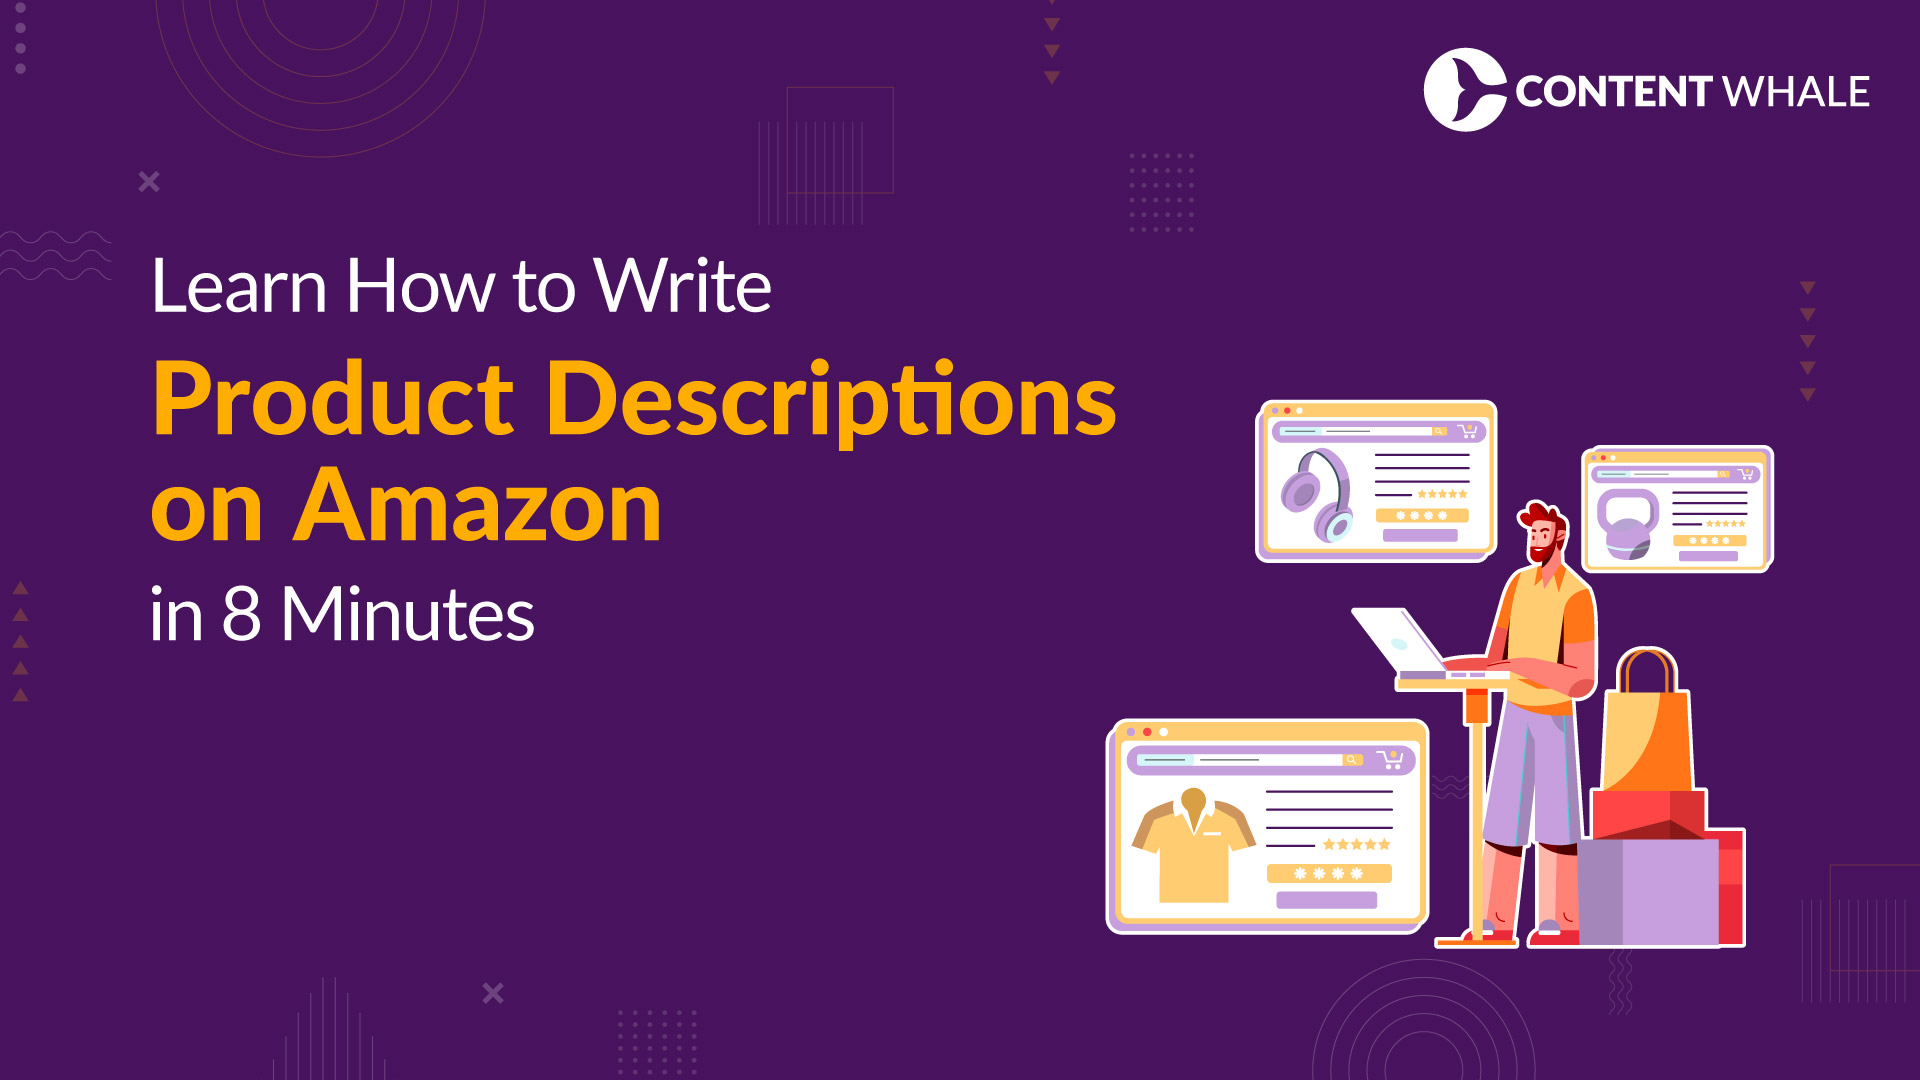 Learn How to Write Product Descriptions on Amazon in 8 Minutes | How to write amazon product descriptions | how to write product descriptions on amazon